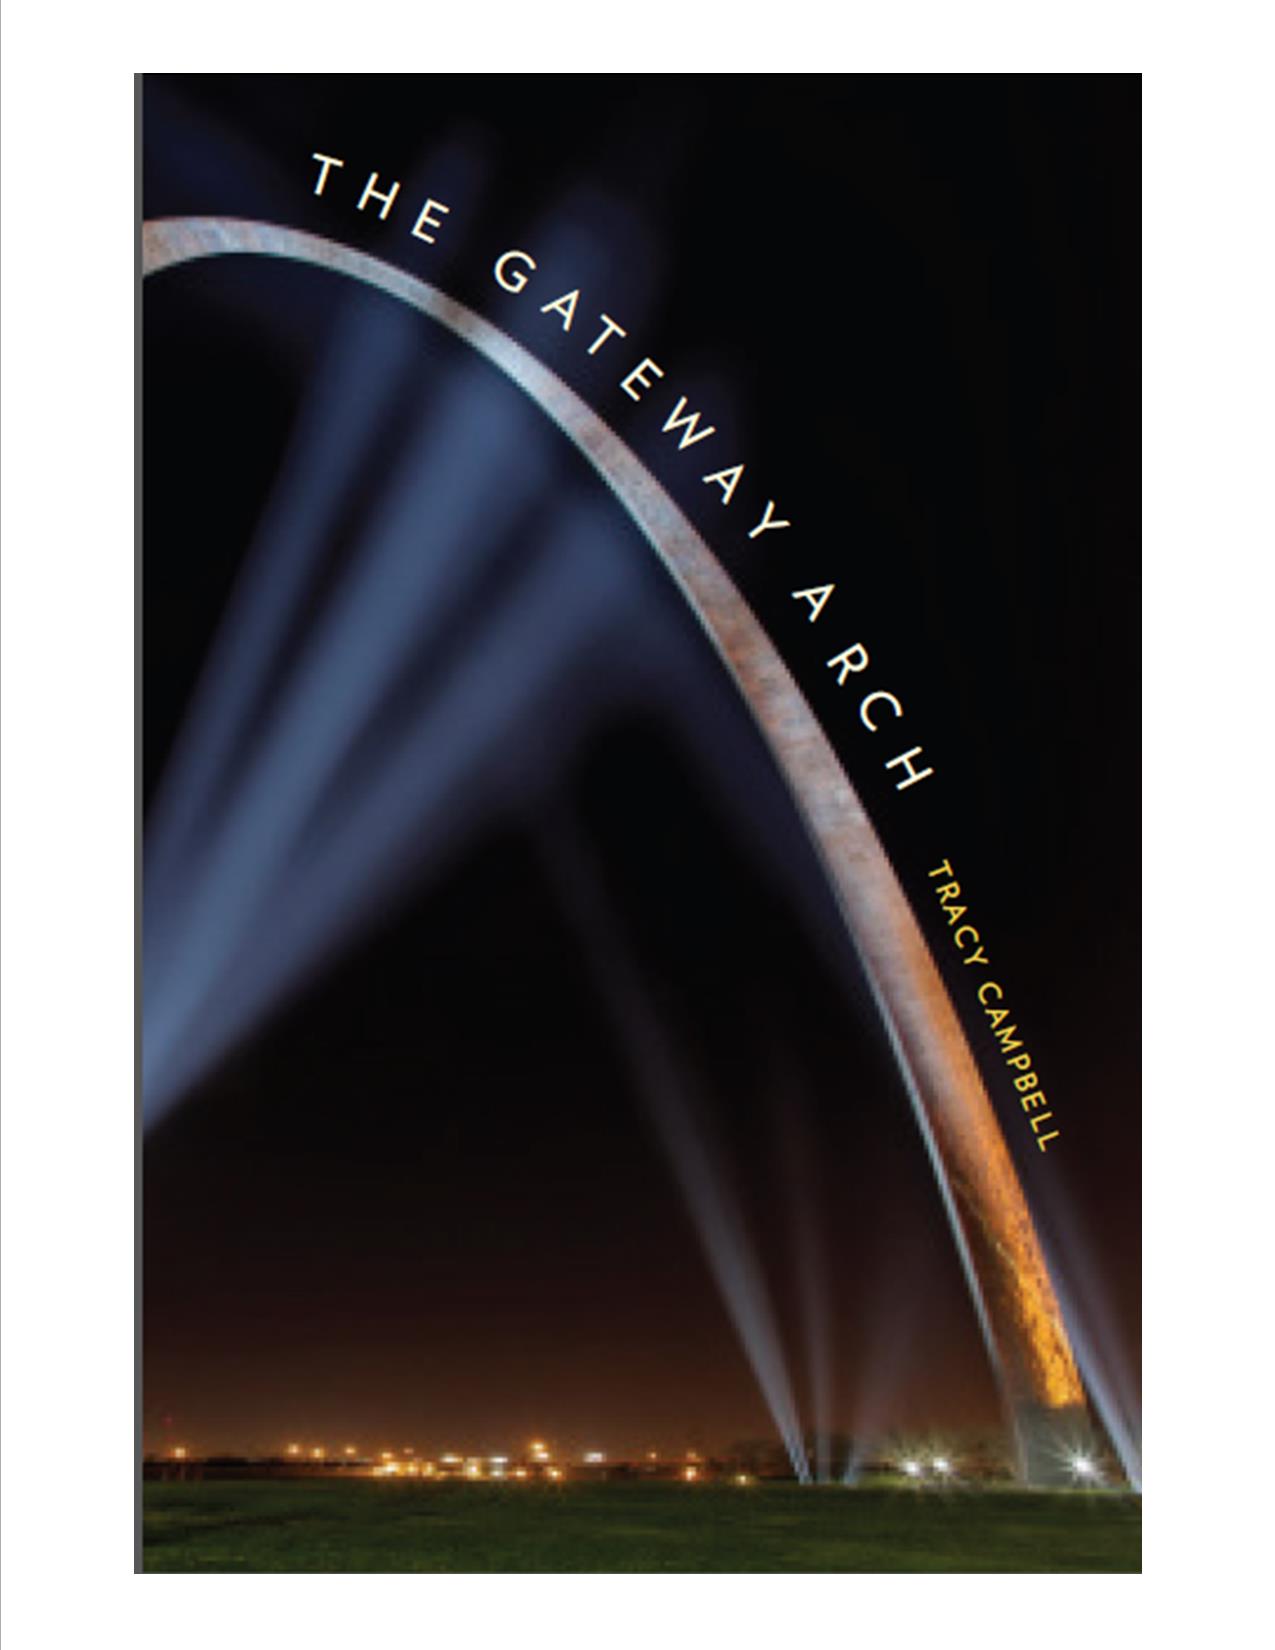 Tracy Campbell's latest book, "The Gateway Arch: A Biography," explores the political and economic history of St. Louis and the origins of the city's most recognized structure, the Gateway Arch.